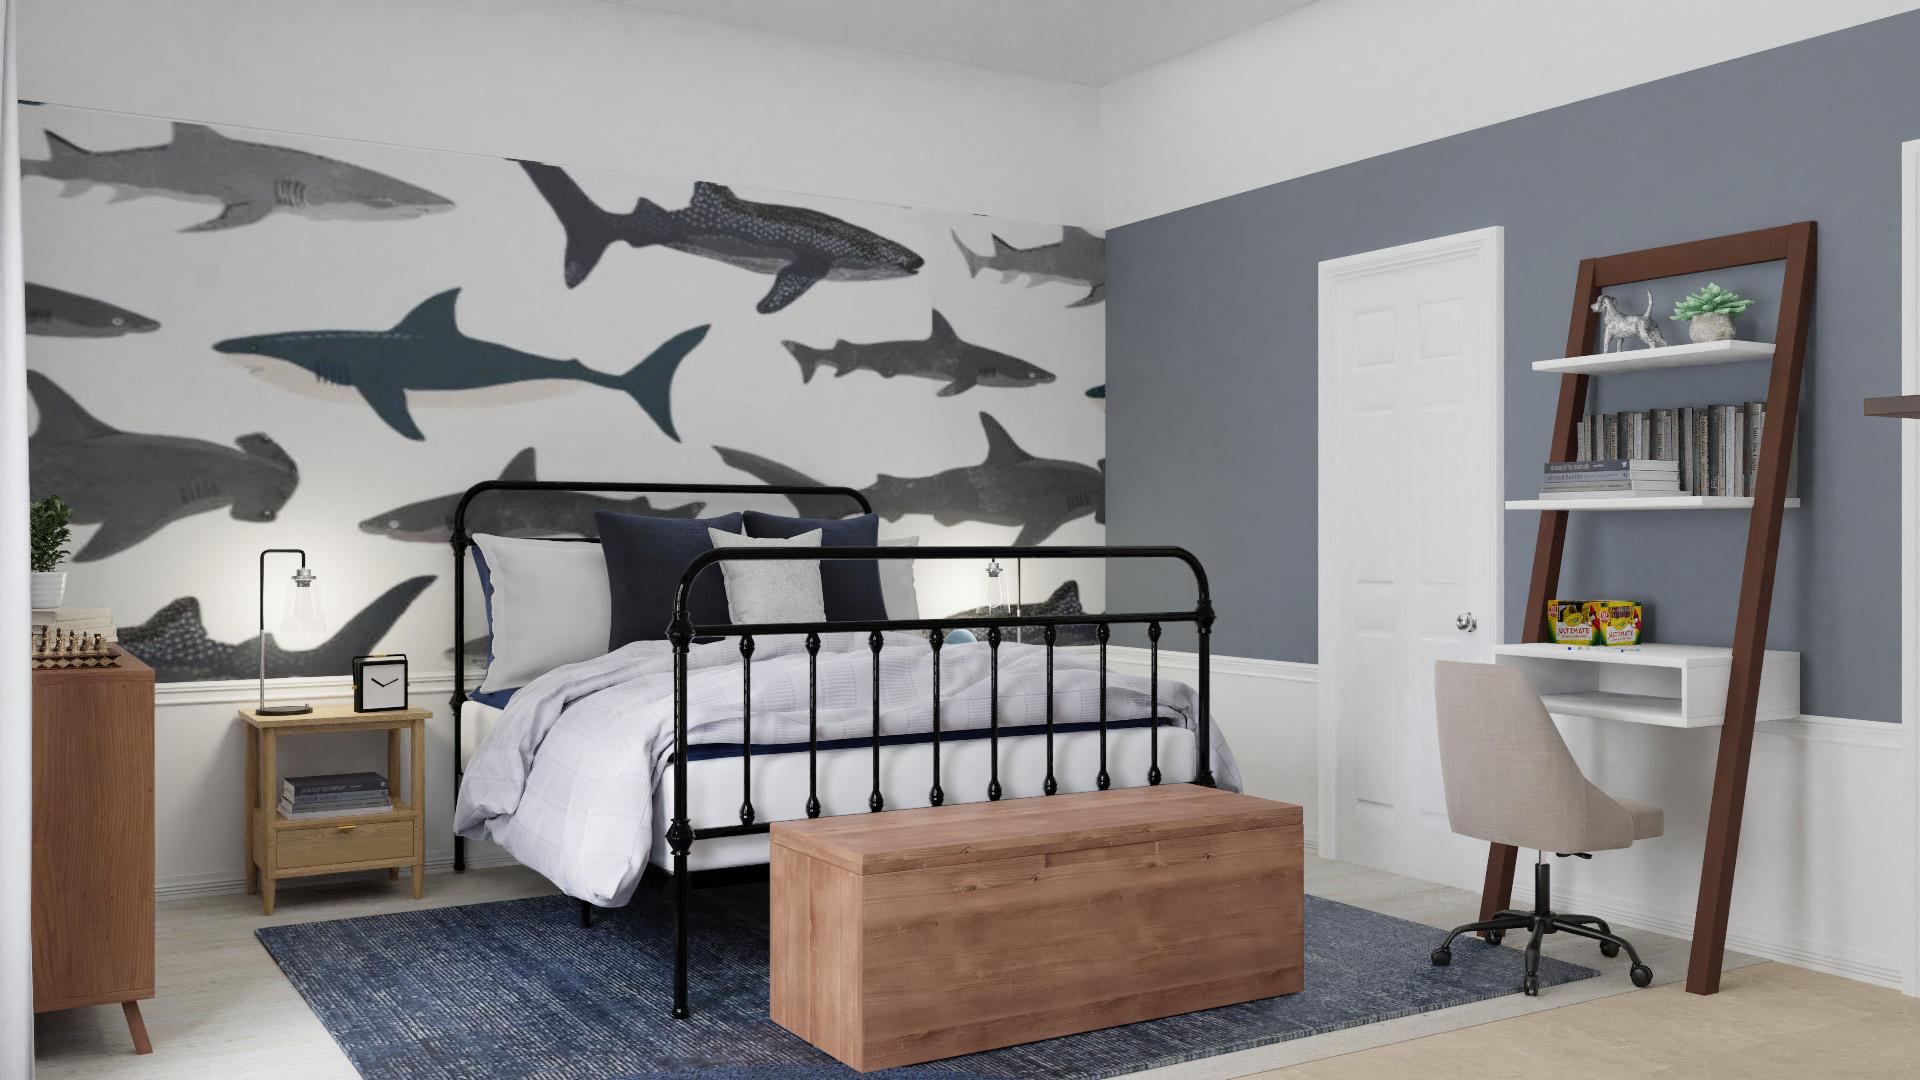 Shark-Theme Kids Bedroom with Oceanic Accents